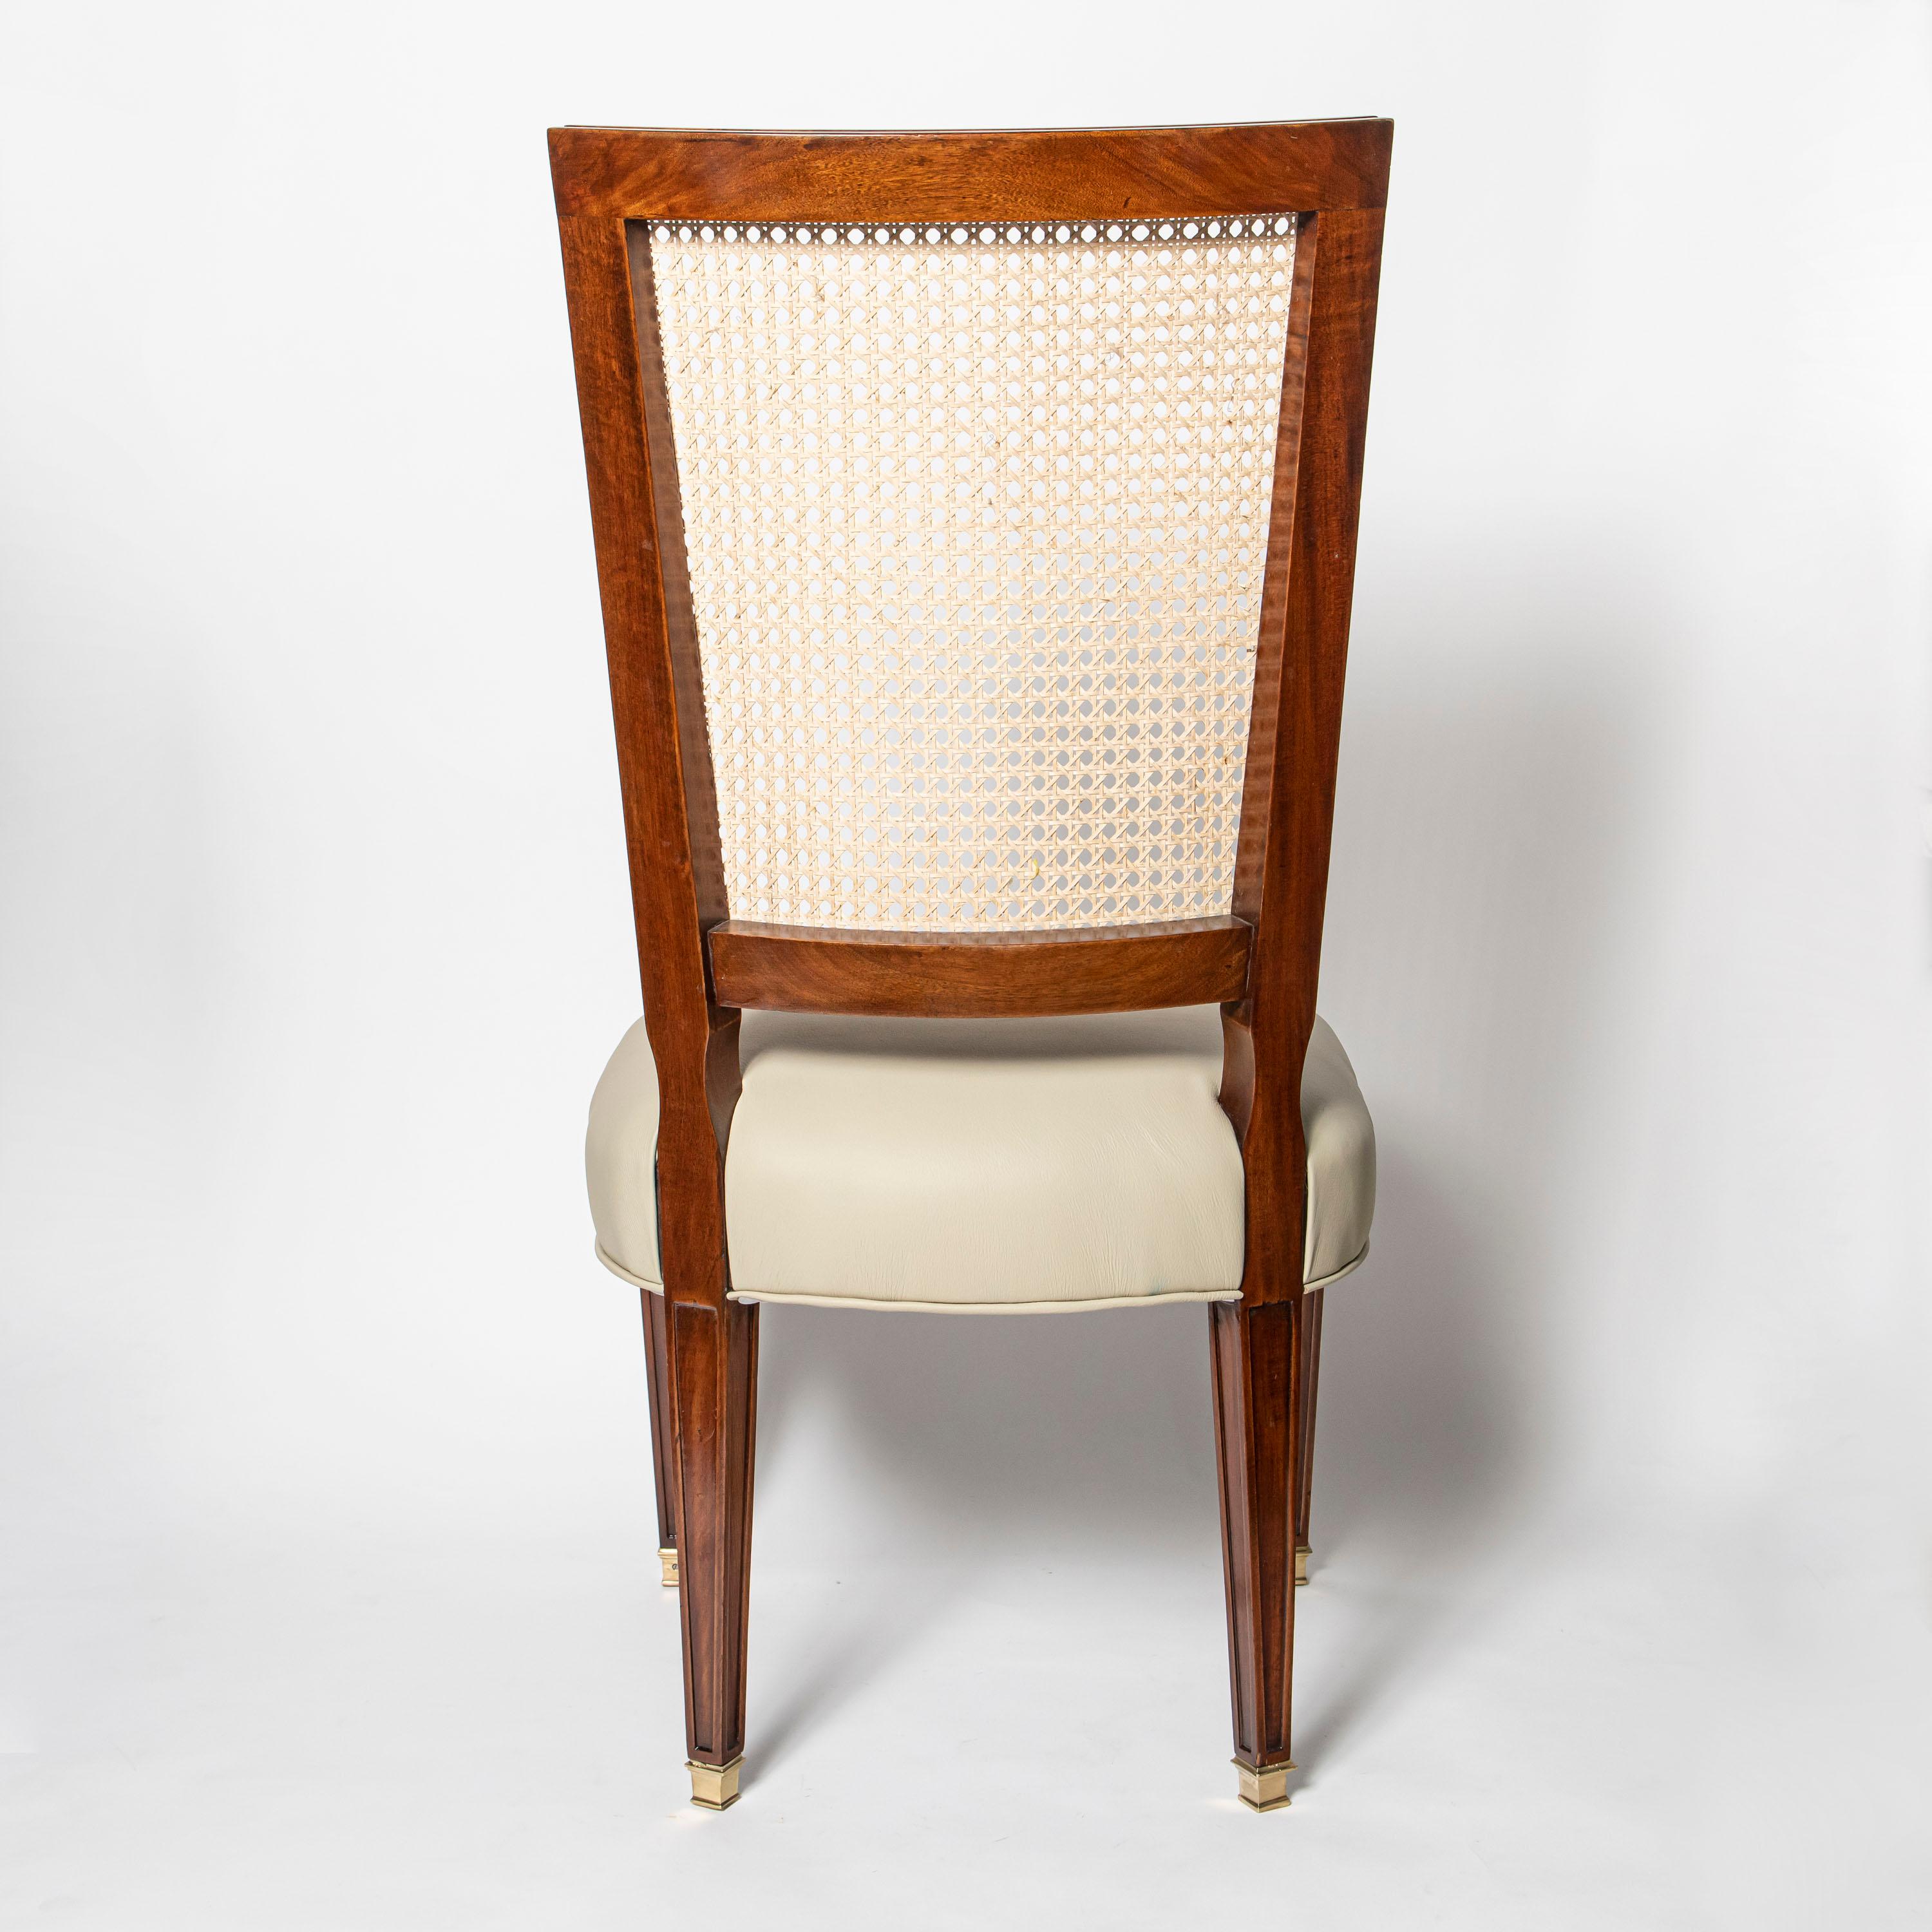 Mid-20th Century Set of Eight Wood, Rattan and Leather Chairs by Casa Comte, Argentina, 1940 For Sale